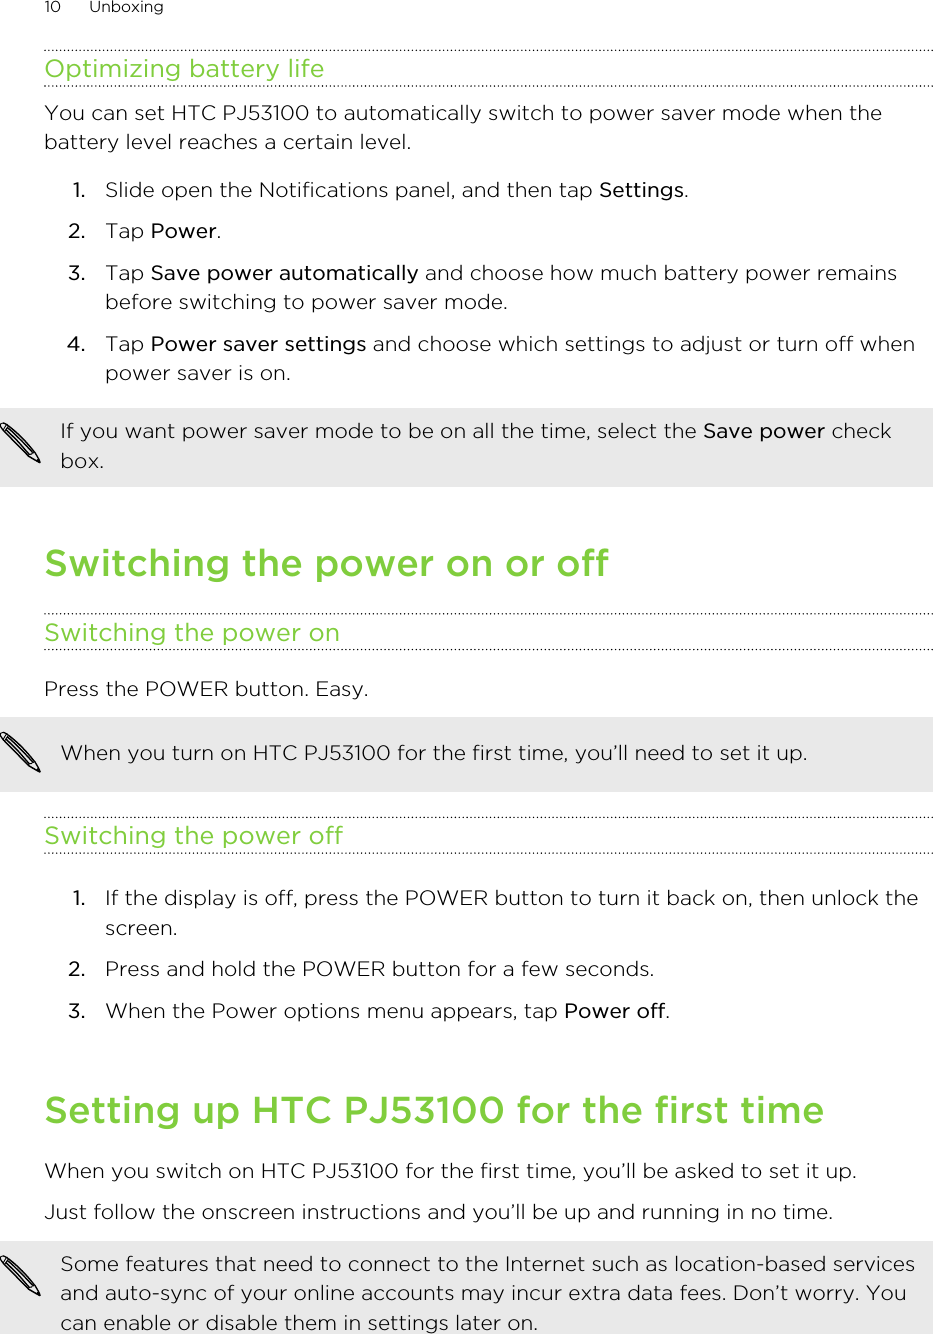 Optimizing battery lifeYou can set HTC PJ53100 to automatically switch to power saver mode when thebattery level reaches a certain level.1. Slide open the Notifications panel, and then tap Settings.2. Tap Power.3. Tap Save power automatically and choose how much battery power remainsbefore switching to power saver mode.4. Tap Power saver settings and choose which settings to adjust or turn off whenpower saver is on.If you want power saver mode to be on all the time, select the Save power checkbox.Switching the power on or offSwitching the power onPress the POWER button. Easy. When you turn on HTC PJ53100 for the first time, you’ll need to set it up.Switching the power off1. If the display is off, press the POWER button to turn it back on, then unlock thescreen.2. Press and hold the POWER button for a few seconds.3. When the Power options menu appears, tap Power off.Setting up HTC PJ53100 for the first timeWhen you switch on HTC PJ53100 for the first time, you’ll be asked to set it up.Just follow the onscreen instructions and you’ll be up and running in no time.Some features that need to connect to the Internet such as location-based servicesand auto-sync of your online accounts may incur extra data fees. Don’t worry. Youcan enable or disable them in settings later on.10 Unboxing